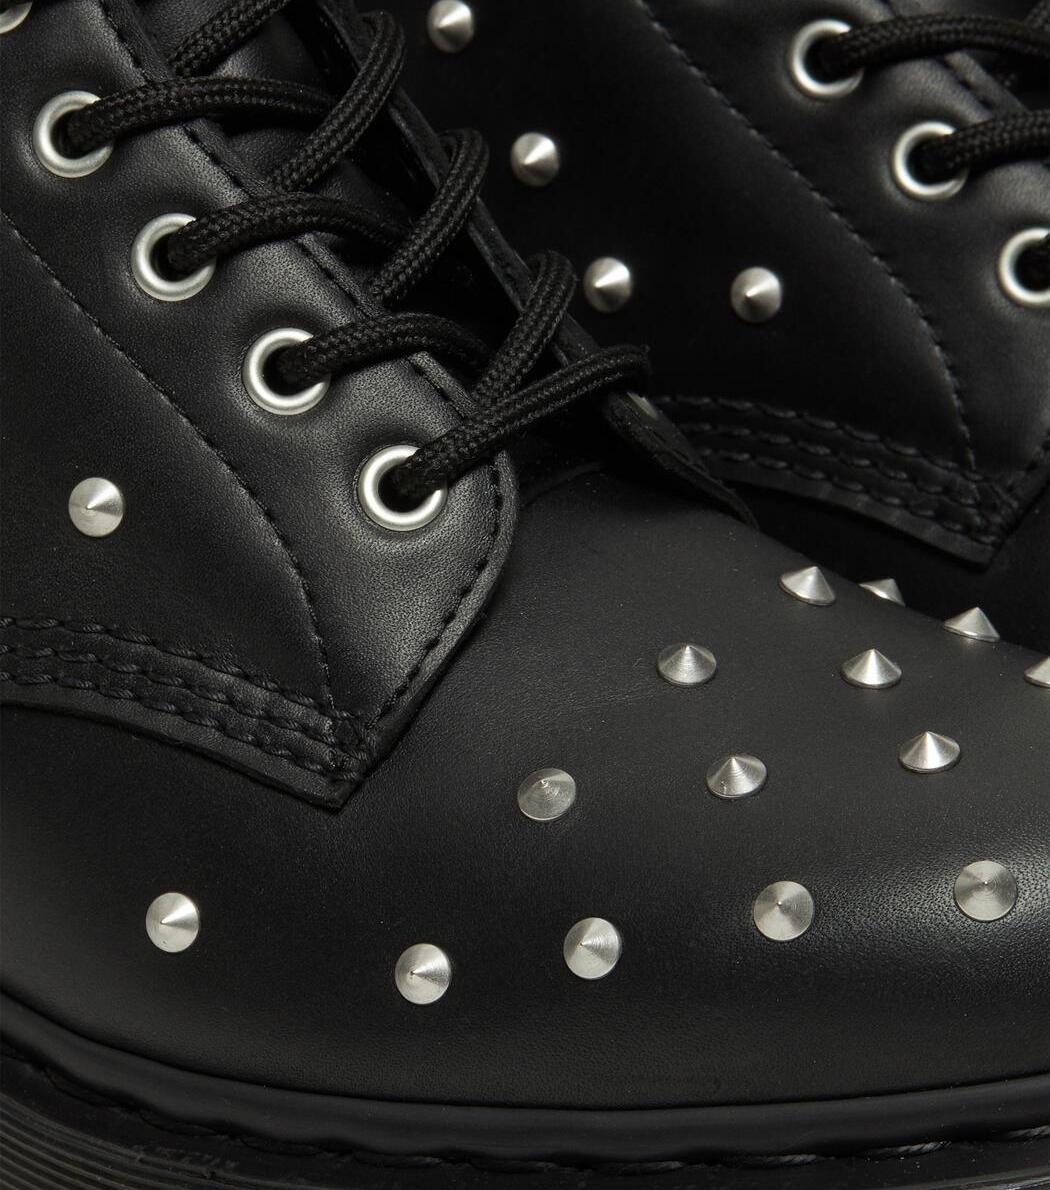 Dr. Martens 1460 Stud Wanama Leather Lace Up Boots Black